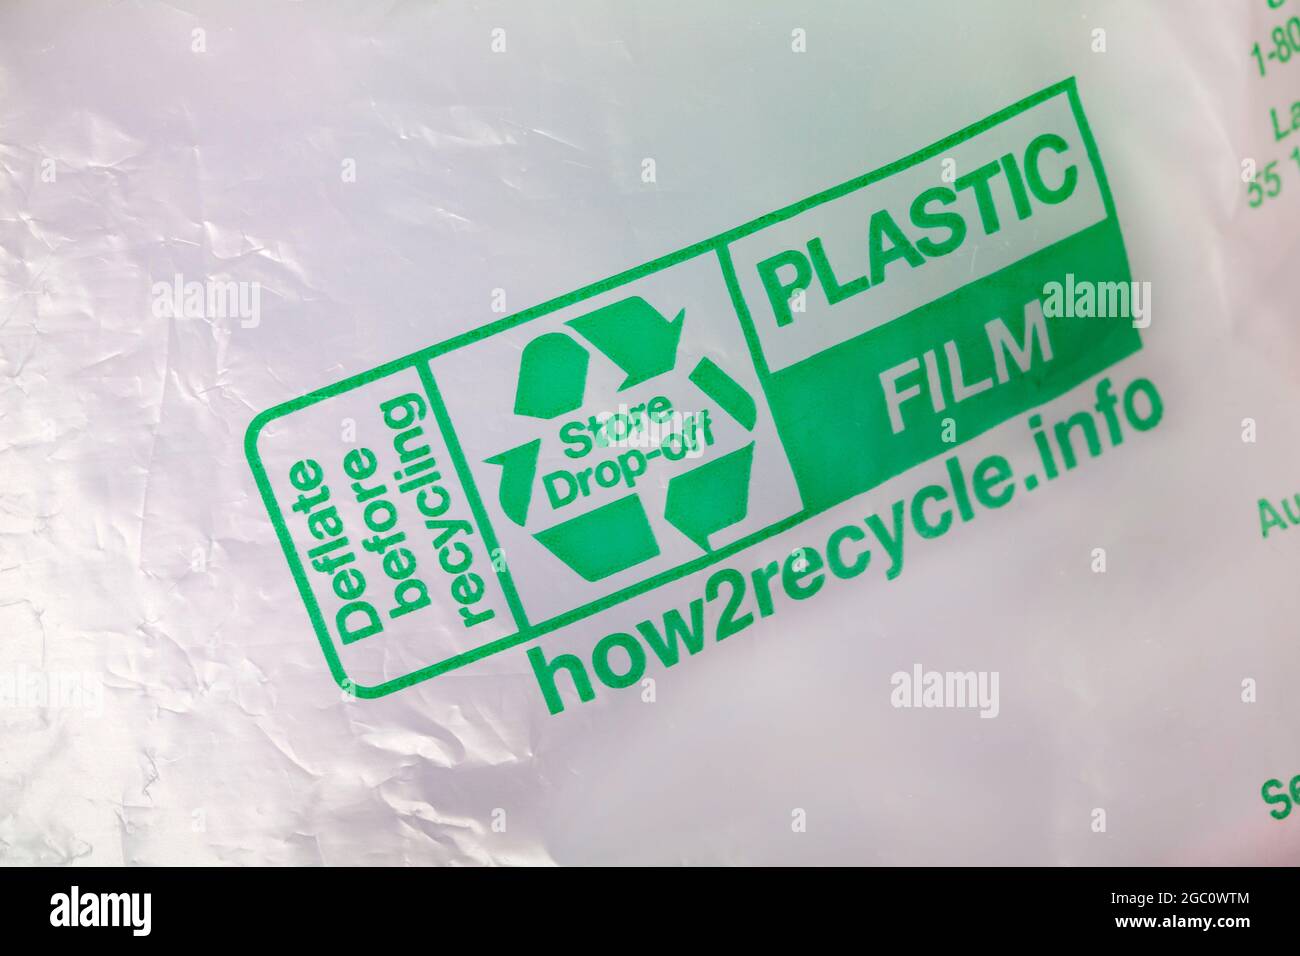 deflate before recycling with recycle logo recycling logo Mobius Loop symbol store drop off on plastic film packaging Stock Photo